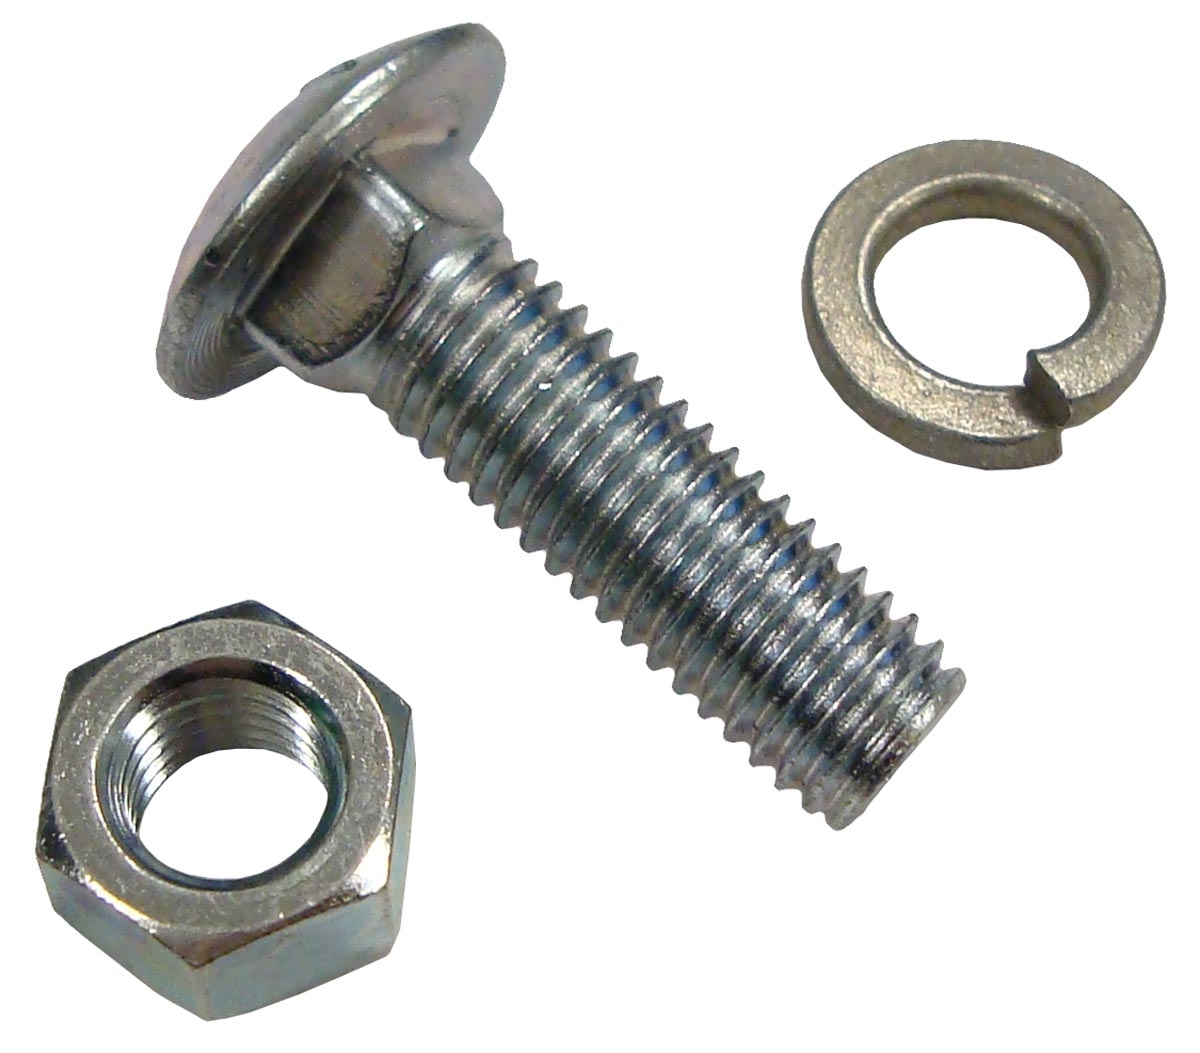 FRONT WHEEL WEIGHT CARRIAGE BOLT, WASHER & NUT KIT - Farmall Parts .